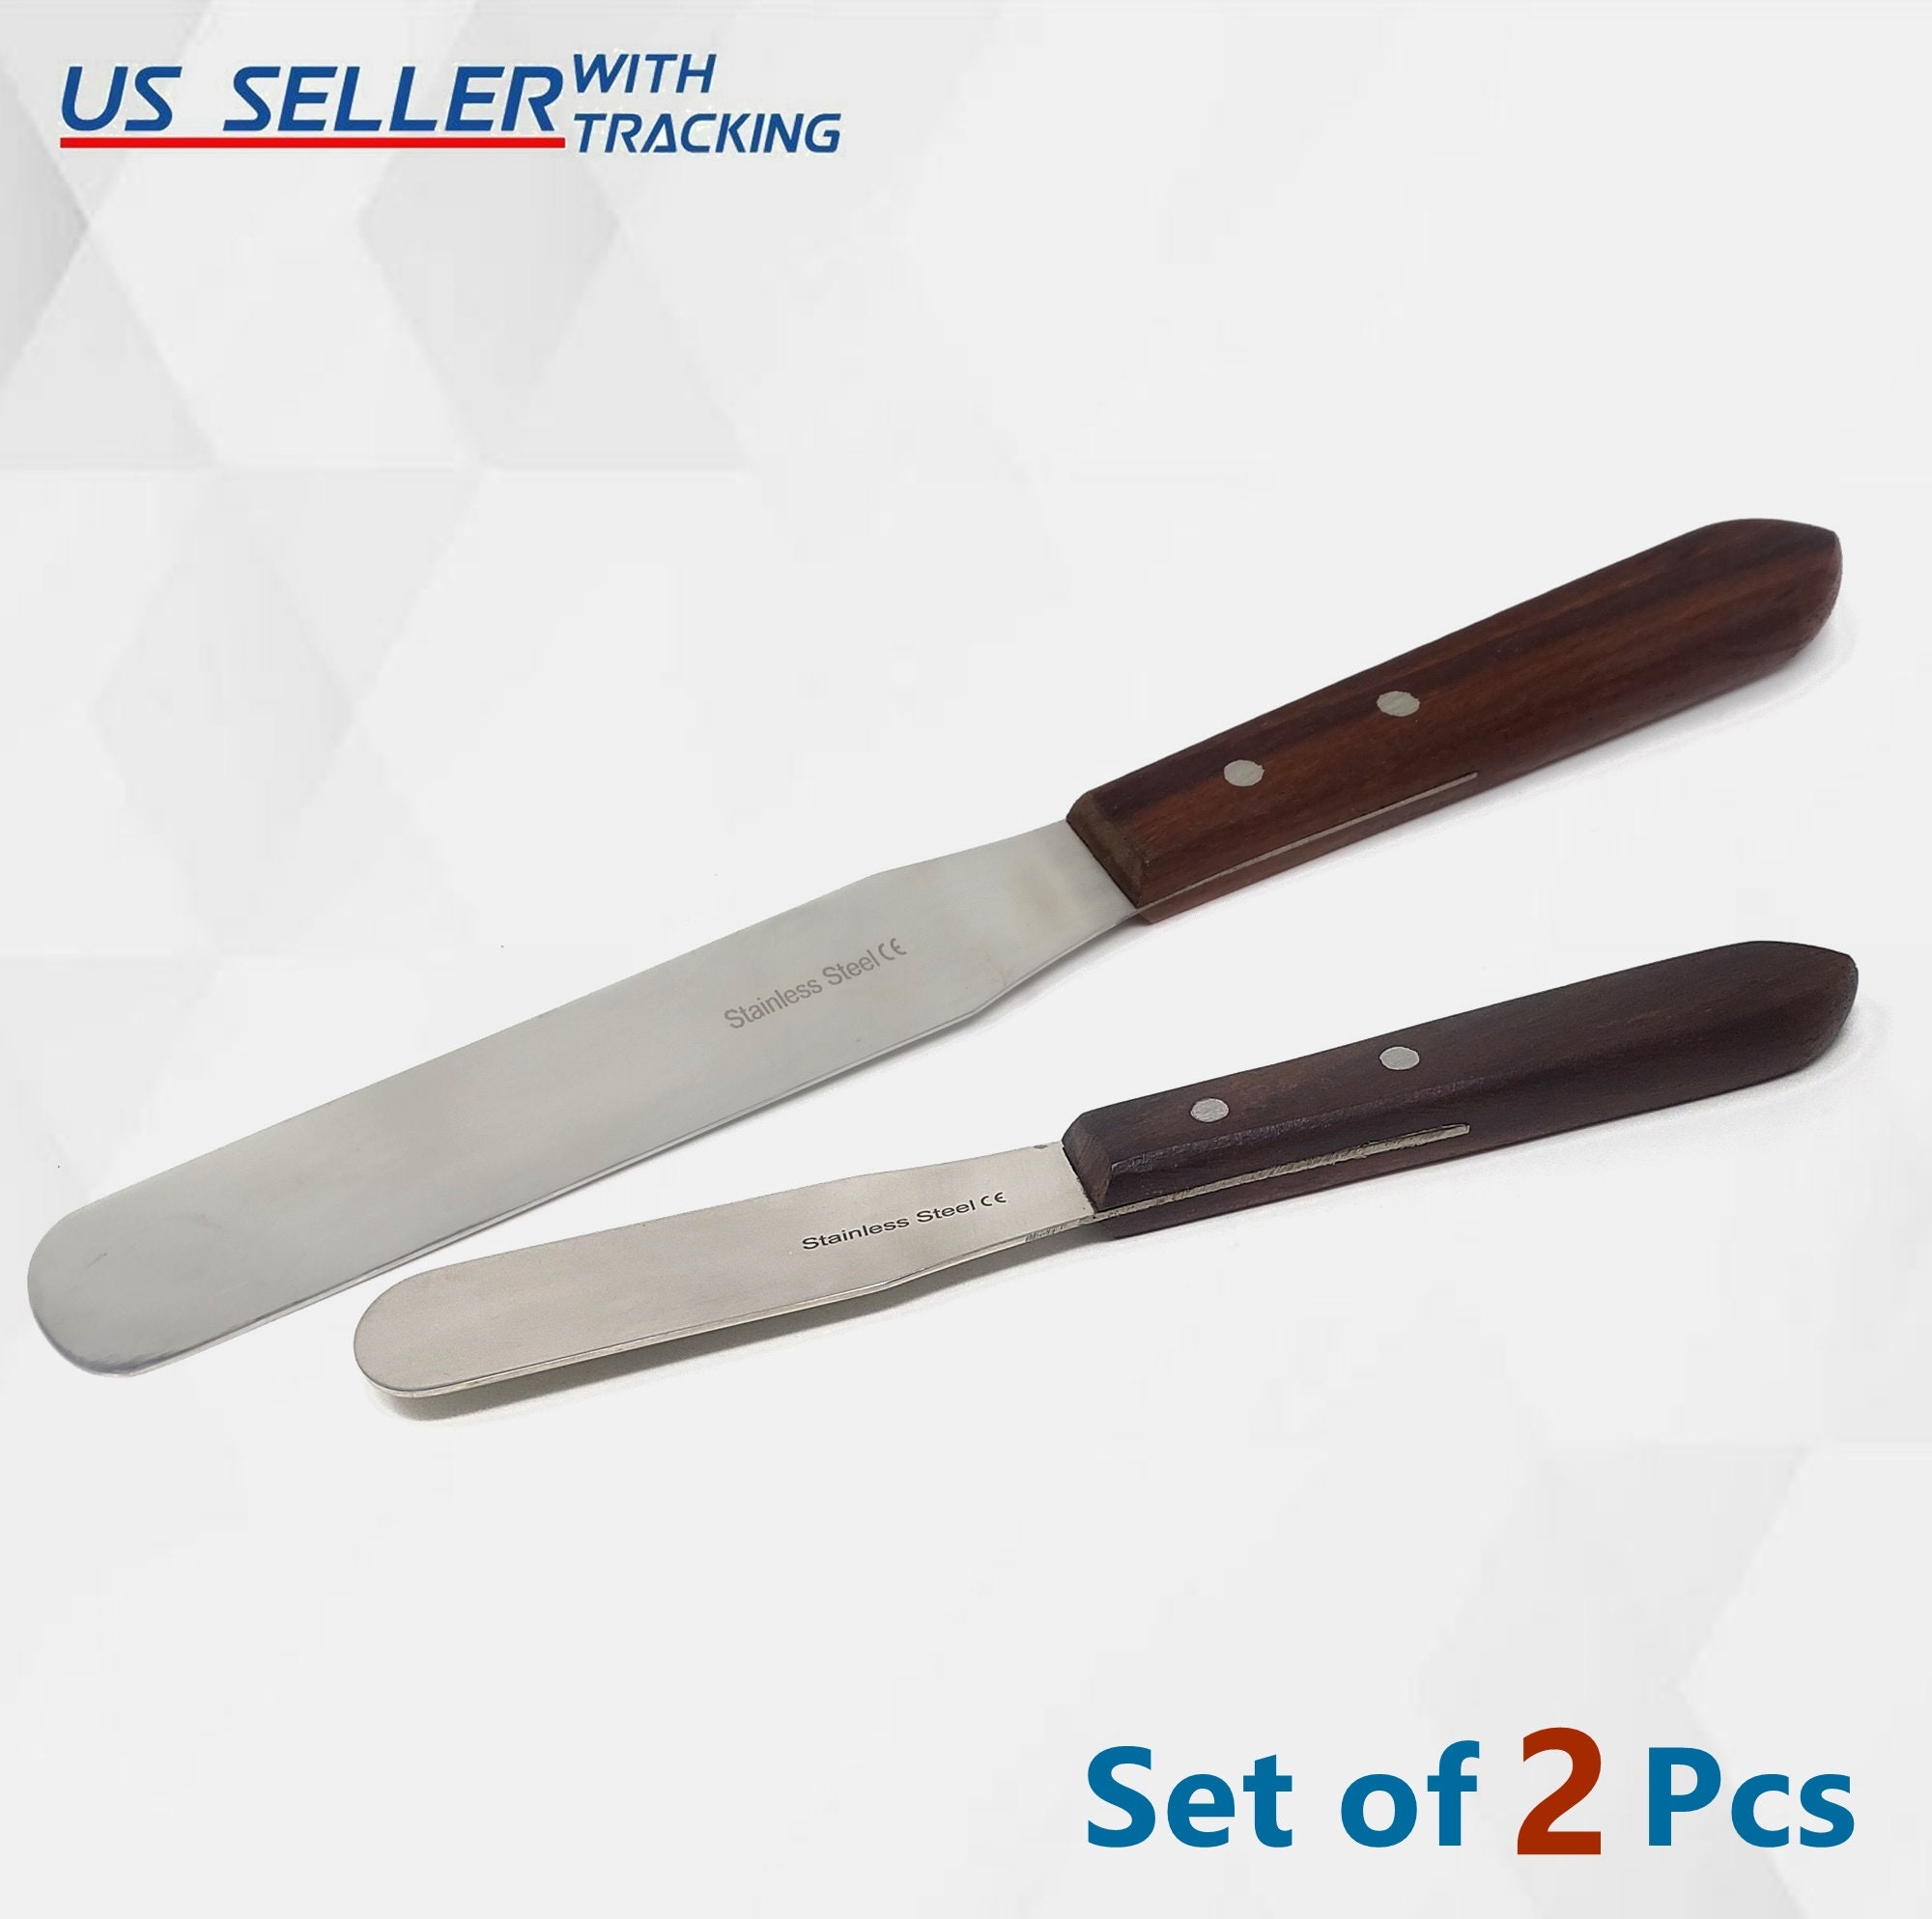 X-acto Knife Set With Carrying Case Precision Cutting Trimming  Interchangeable Blades Cake Sculpting Knife Exacto Whittling Knives 